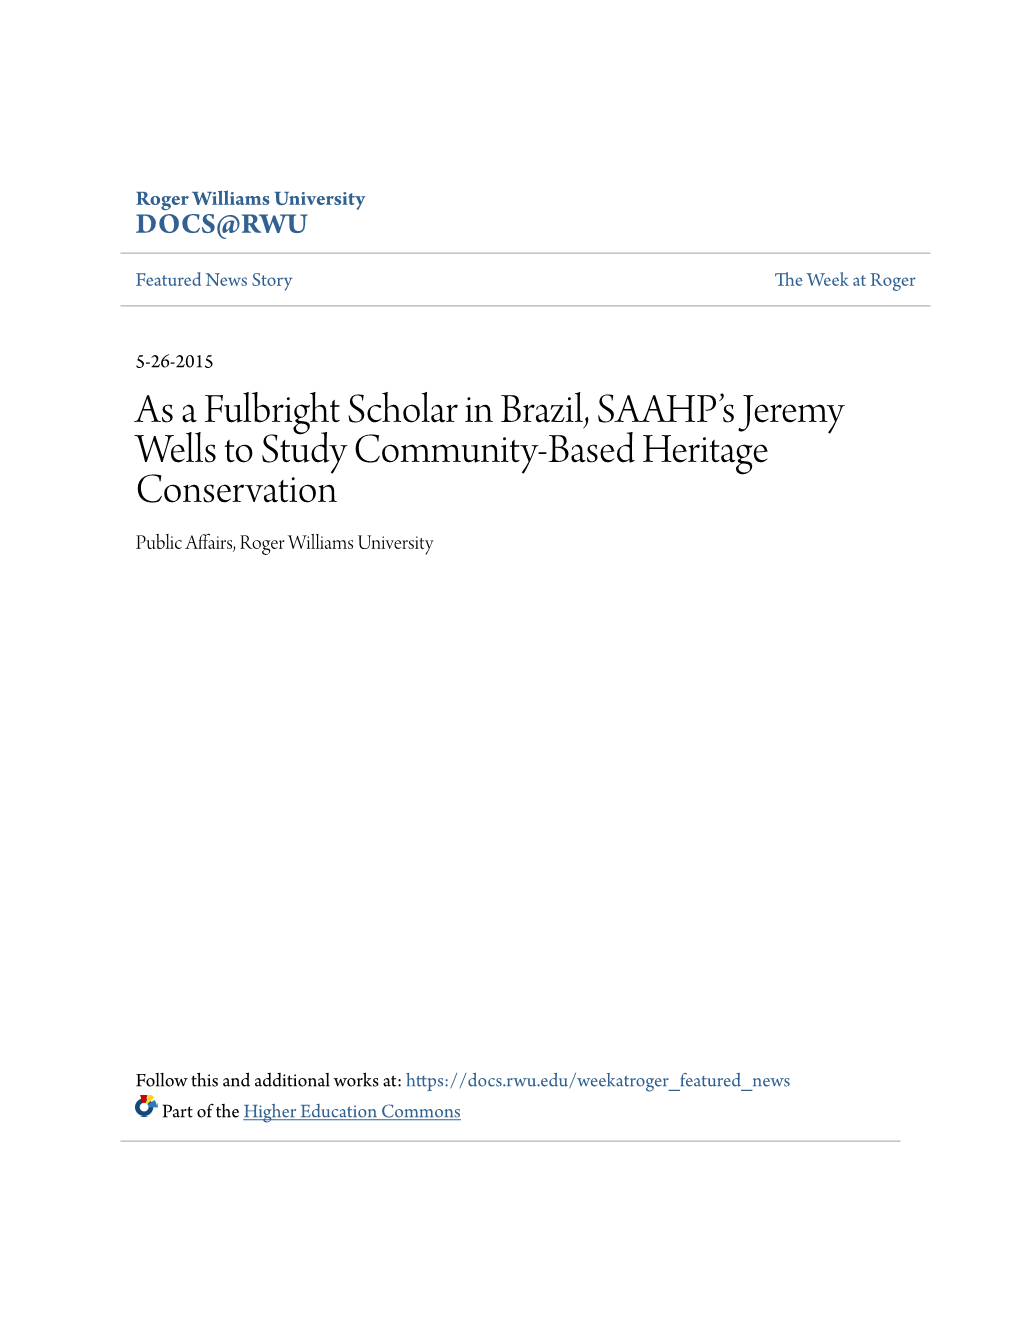 As a Fulbright Scholar in Brazil, SAAHP's Jeremy Wells to Study